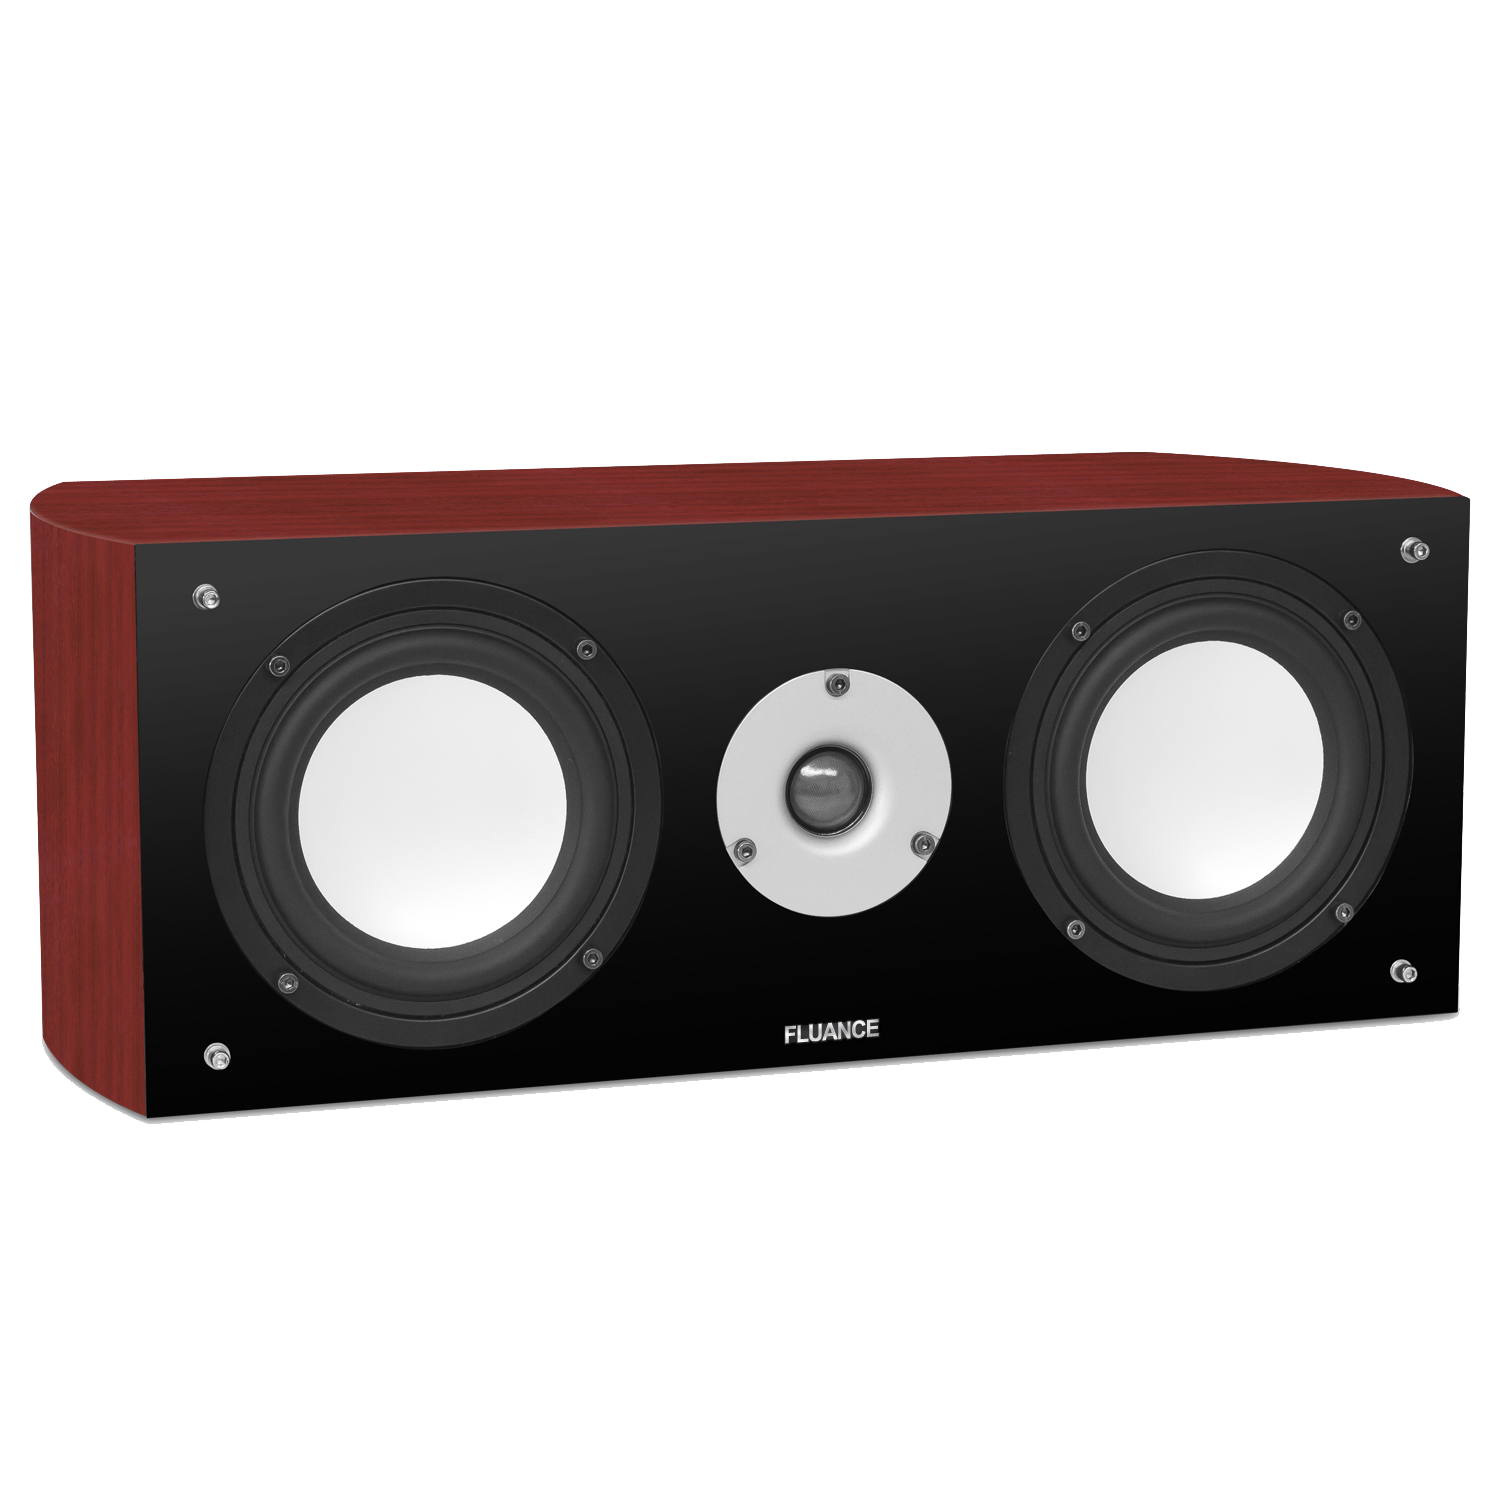 XL7C High Performance Two-way Center Channel Speaker